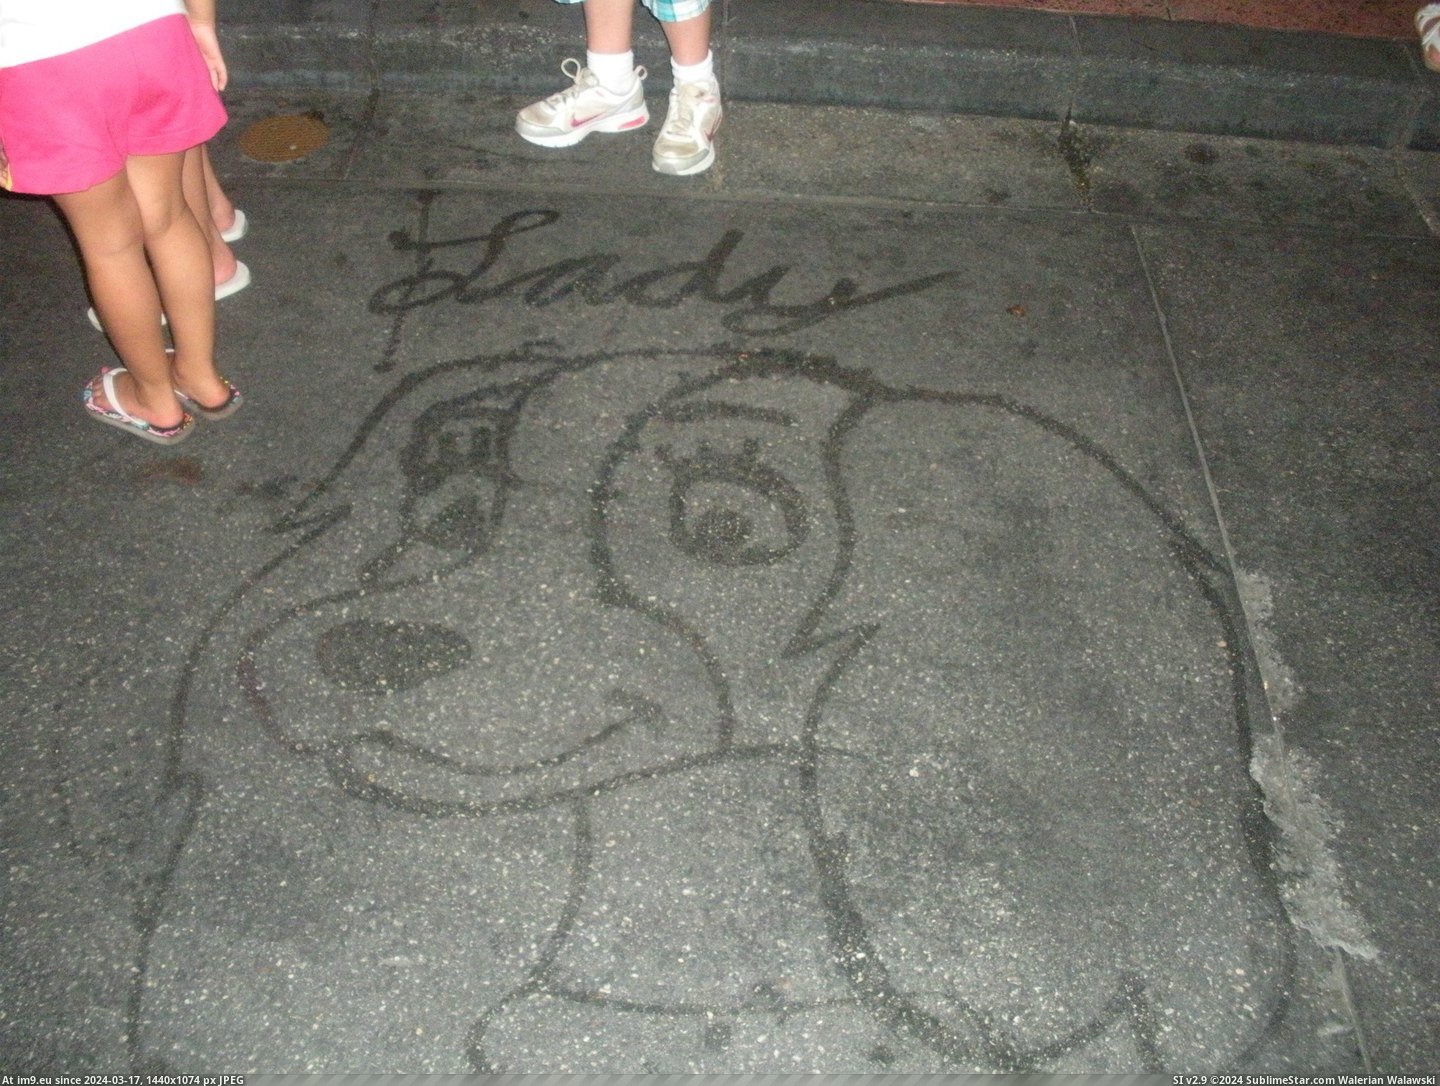 #World #Water #Disney #Guests #Janitor #Broom #Entertain #Characters #Drew #Sidewalk [Pics] As a janitor at Disney World, I drew characters with water and a broom on the sidewalk to entertain guests. 6 Pic. (Изображение из альбом My r/PICS favs))